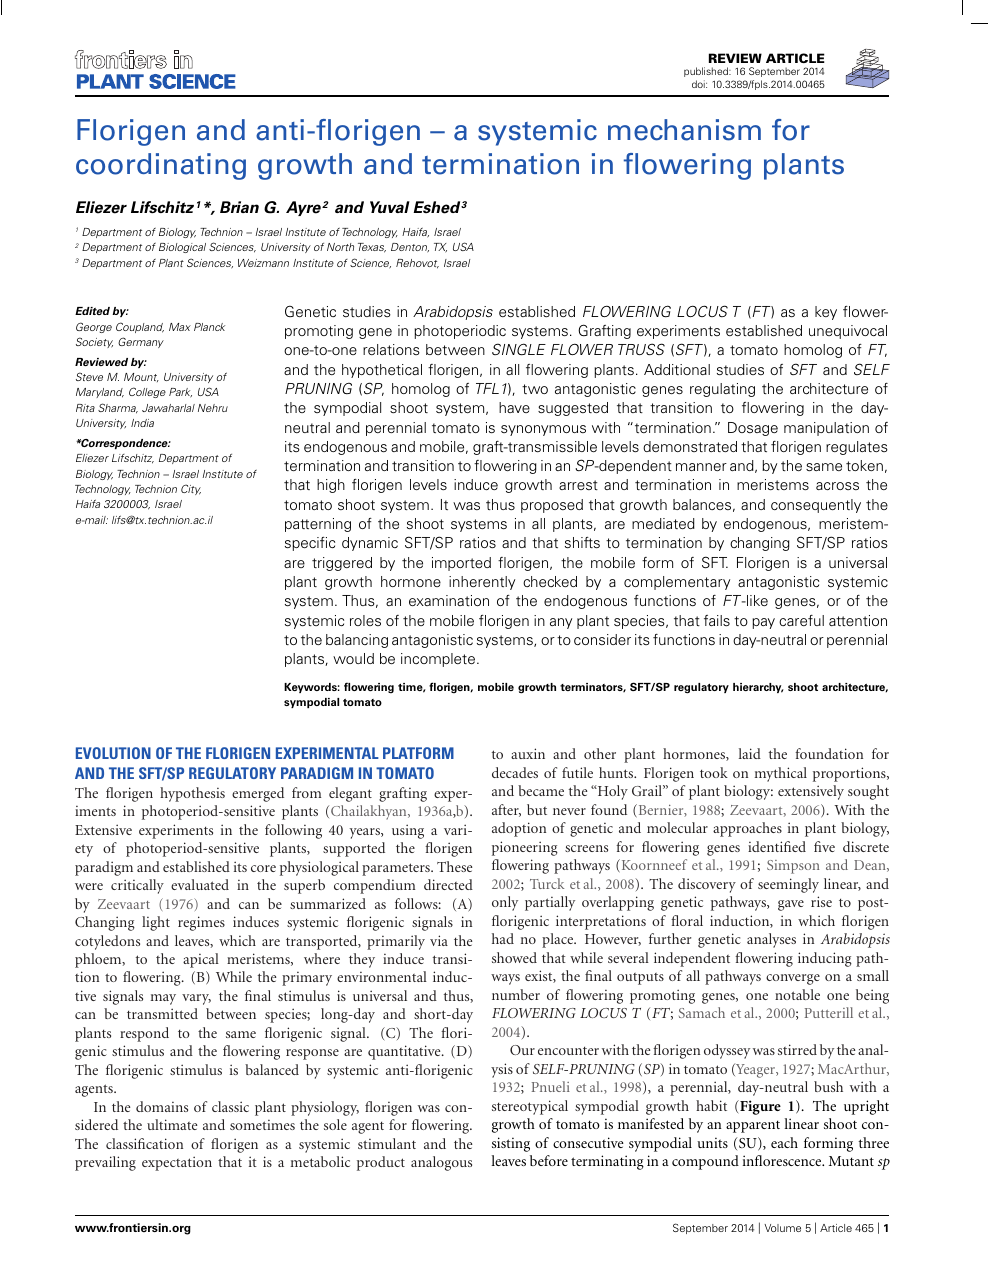 Florigen And Anti Florigen A A Systemic Mechanism For Coordinating Growth And Termination In Flowering Plants Topic Of Research Paper In Biological Sciences Download Scholarly Article Pdf And Read For Free On